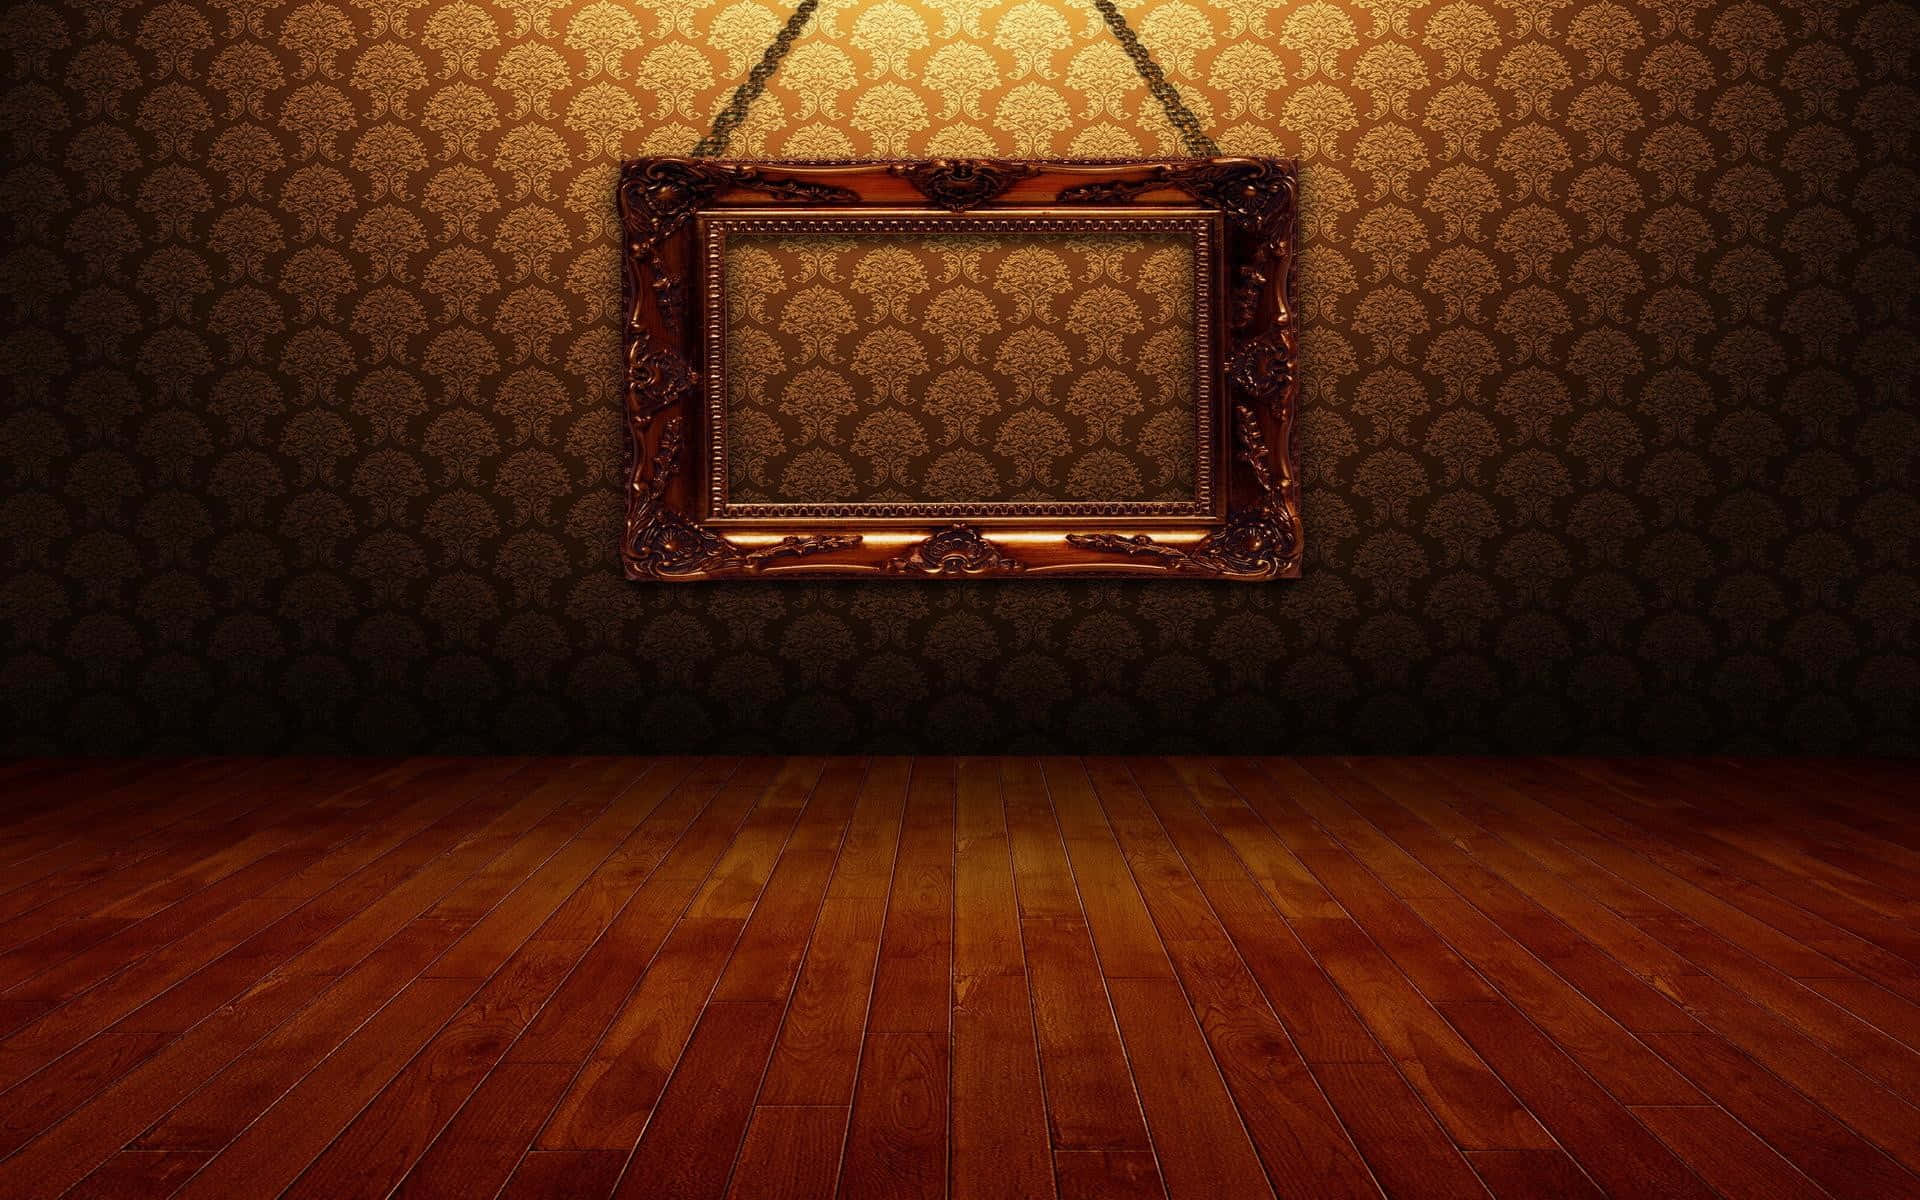 an old frame hanging on a wooden floor